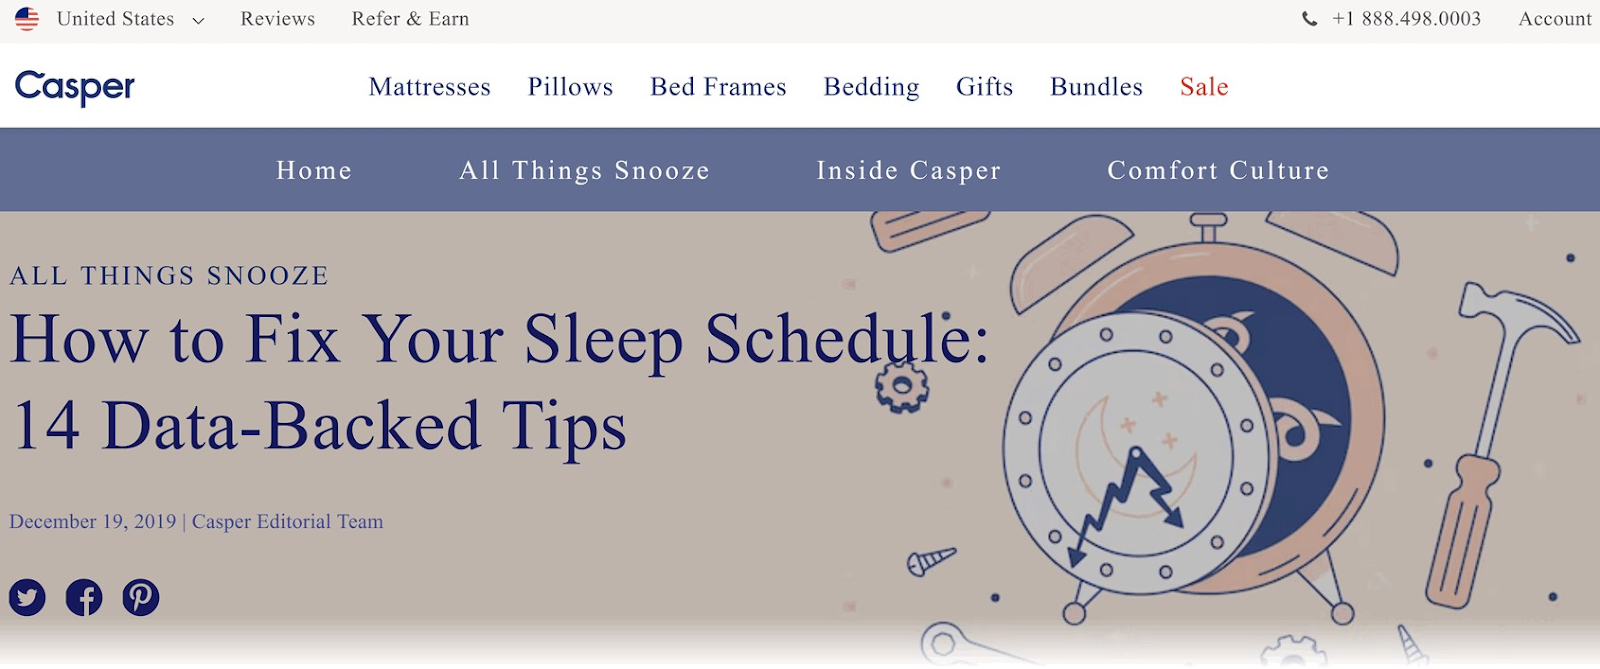 Casper’s guide on “،w to fix your sleep schedule”